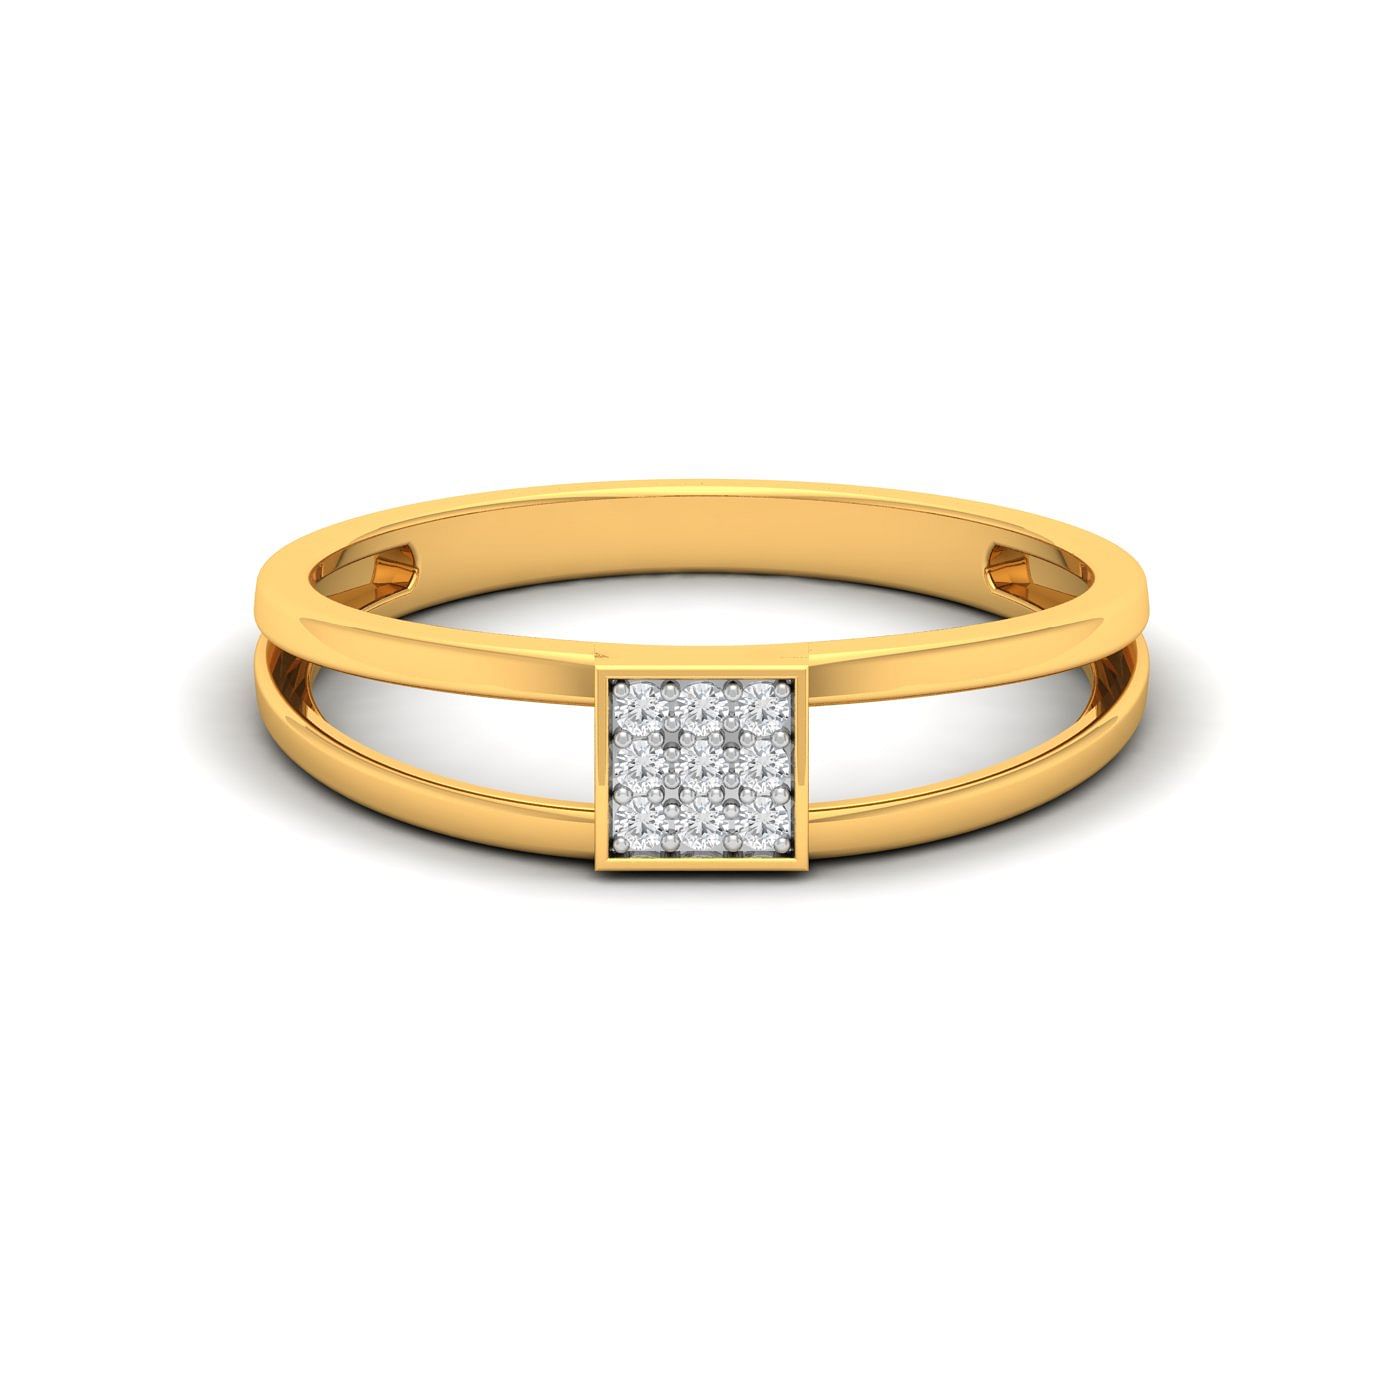 Kasten Double layer Band Ring For Daily Wear Yellow Gold Metal